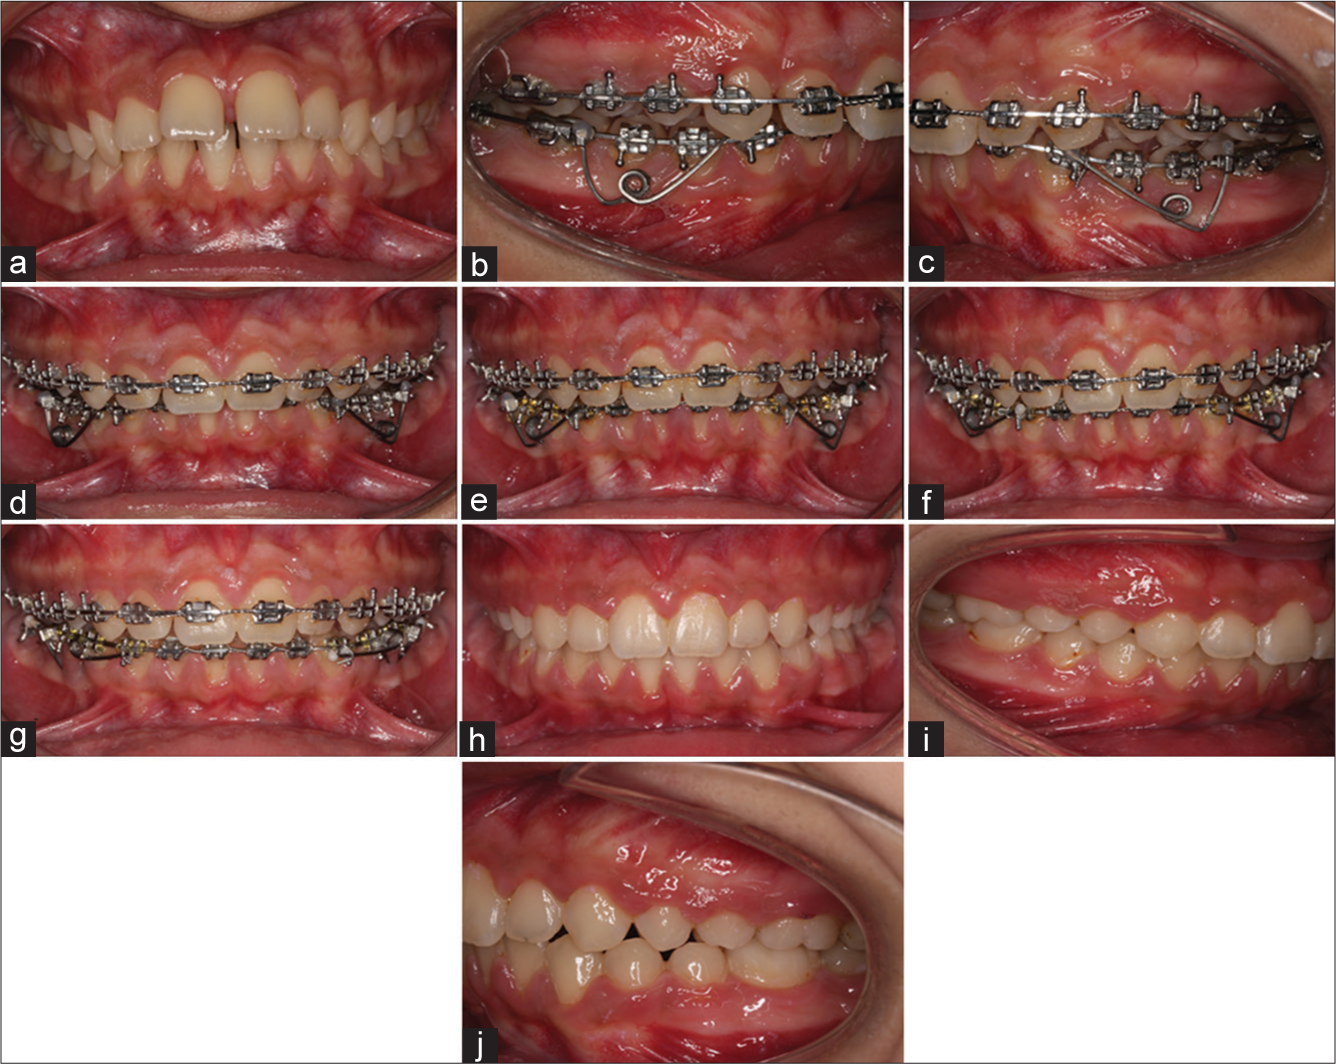 (a) A 16-year-old female patient with proclined upper incisors, lower incisors in contacted with palatal mucosa and deep bite. (b-d) Application of the double-sided intrusion spring at the 8th month of the fixed orthodontic treatment. (e-g) Treatment sequences at the 2nd, 3rd, and 7th month after the application of the double-sided intrusion spring. (h-j). After 24 months of total treatment time